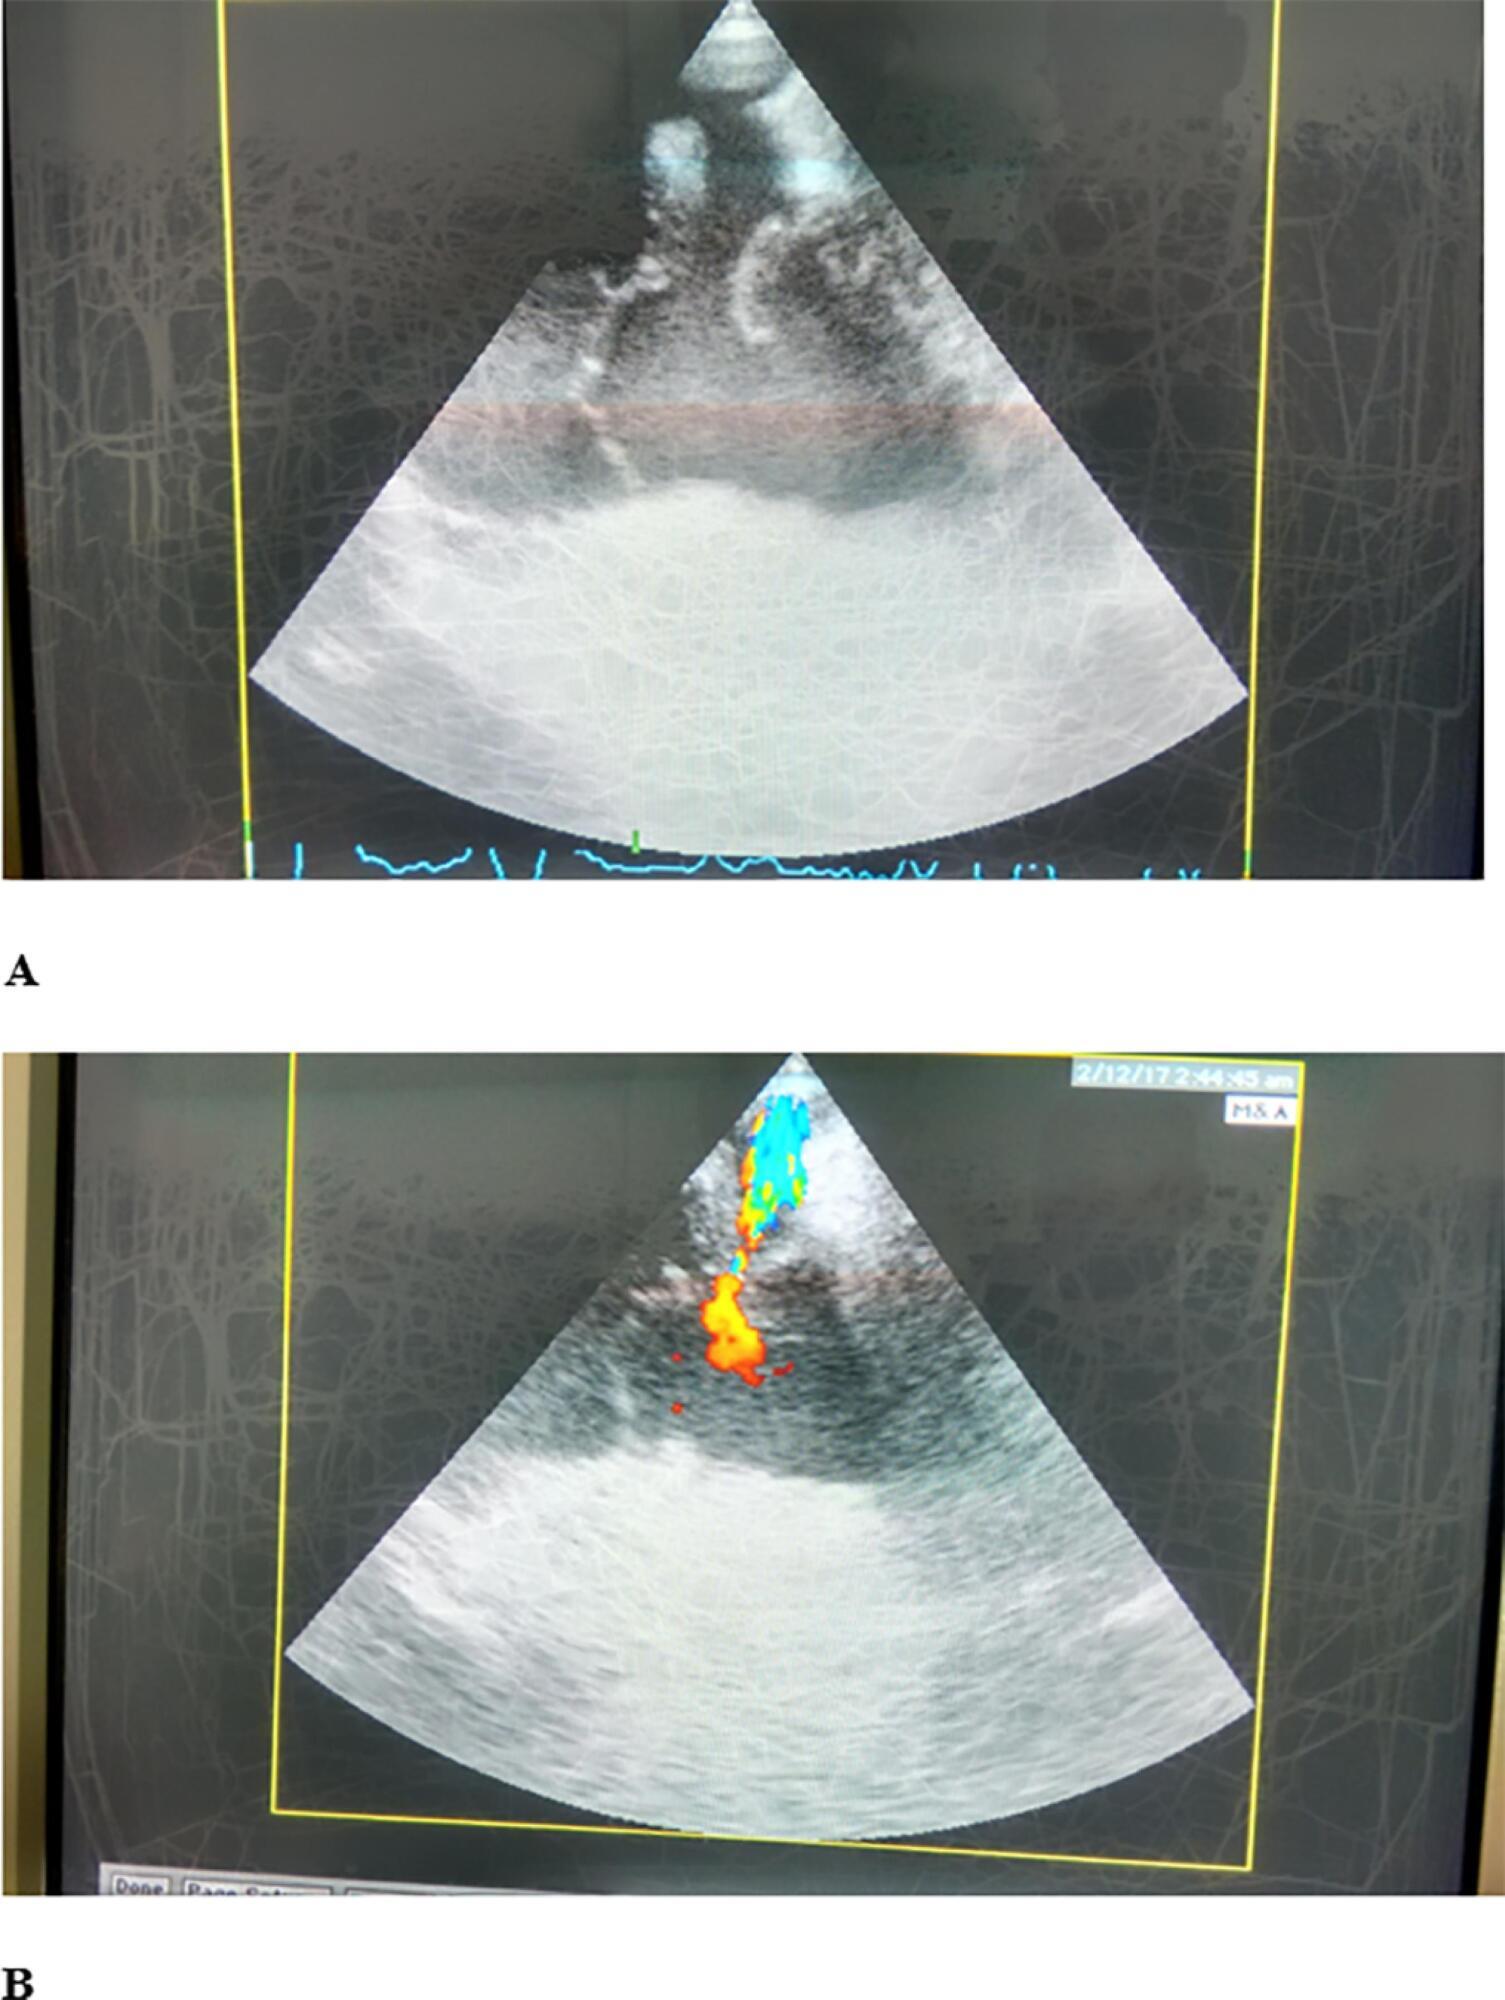 Traumatic tricuspid valve papillary muscle case with concomitant acquired patent foramen ovale and covert right atrial rupture